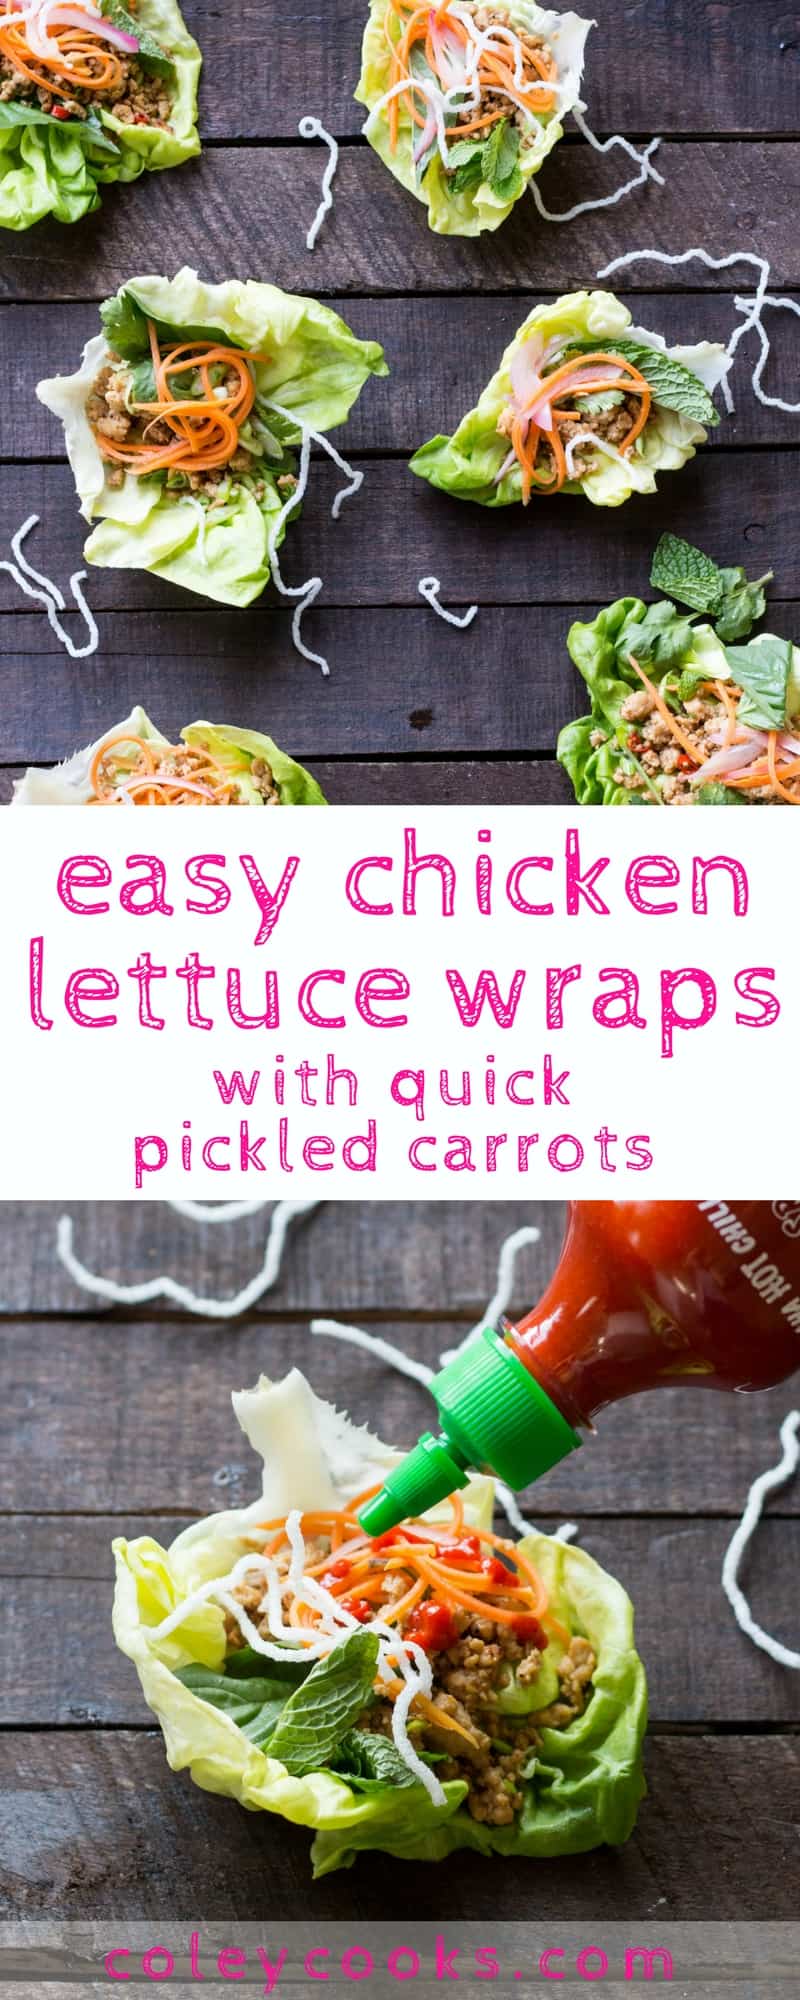 CHICKEN LETTUCE WRAPS with QUICK PICKLED CARROTS | This easy recipe for chicken lettuce wraps is Southeast Asian / Thai inspired. The best quick and easy chicken dinner recipe! | ColeyCooks.com